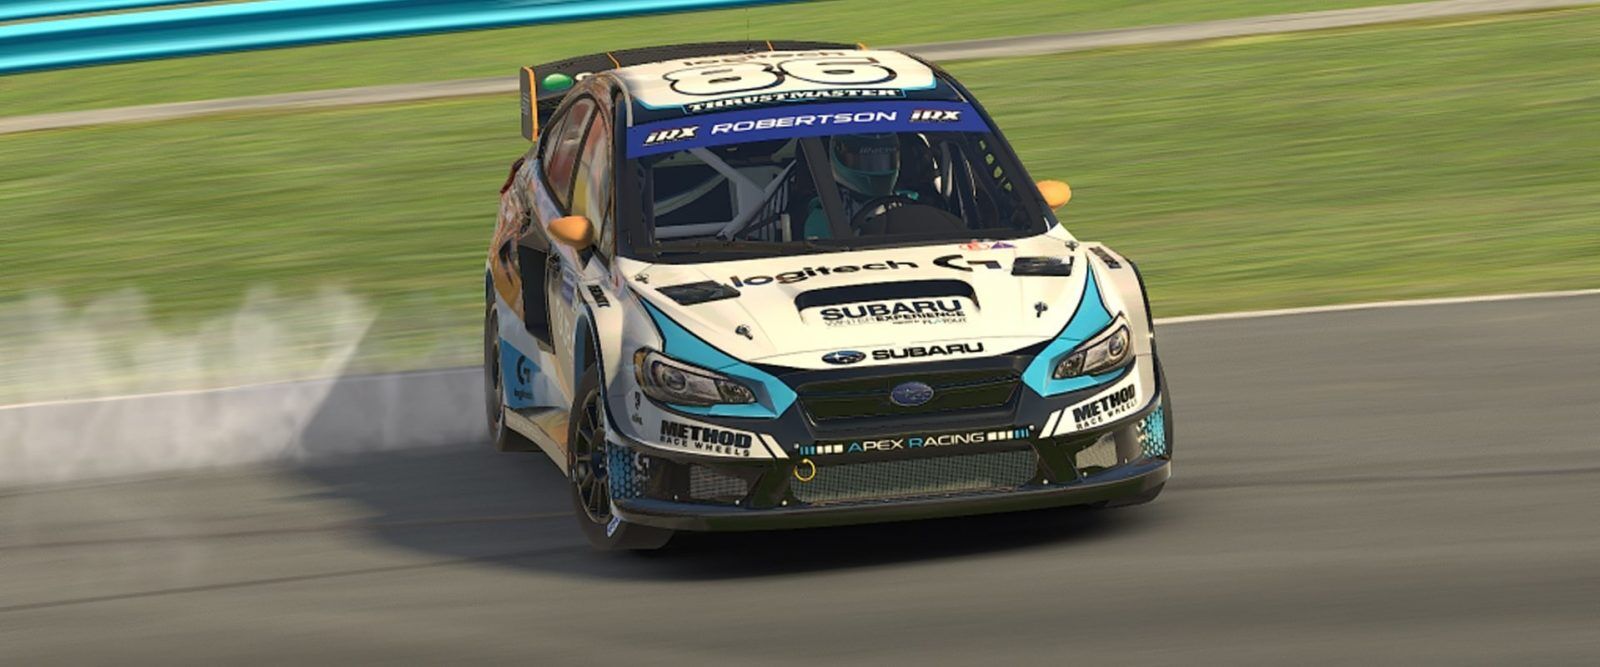 iRacing Rallycross: first round ends a packed week